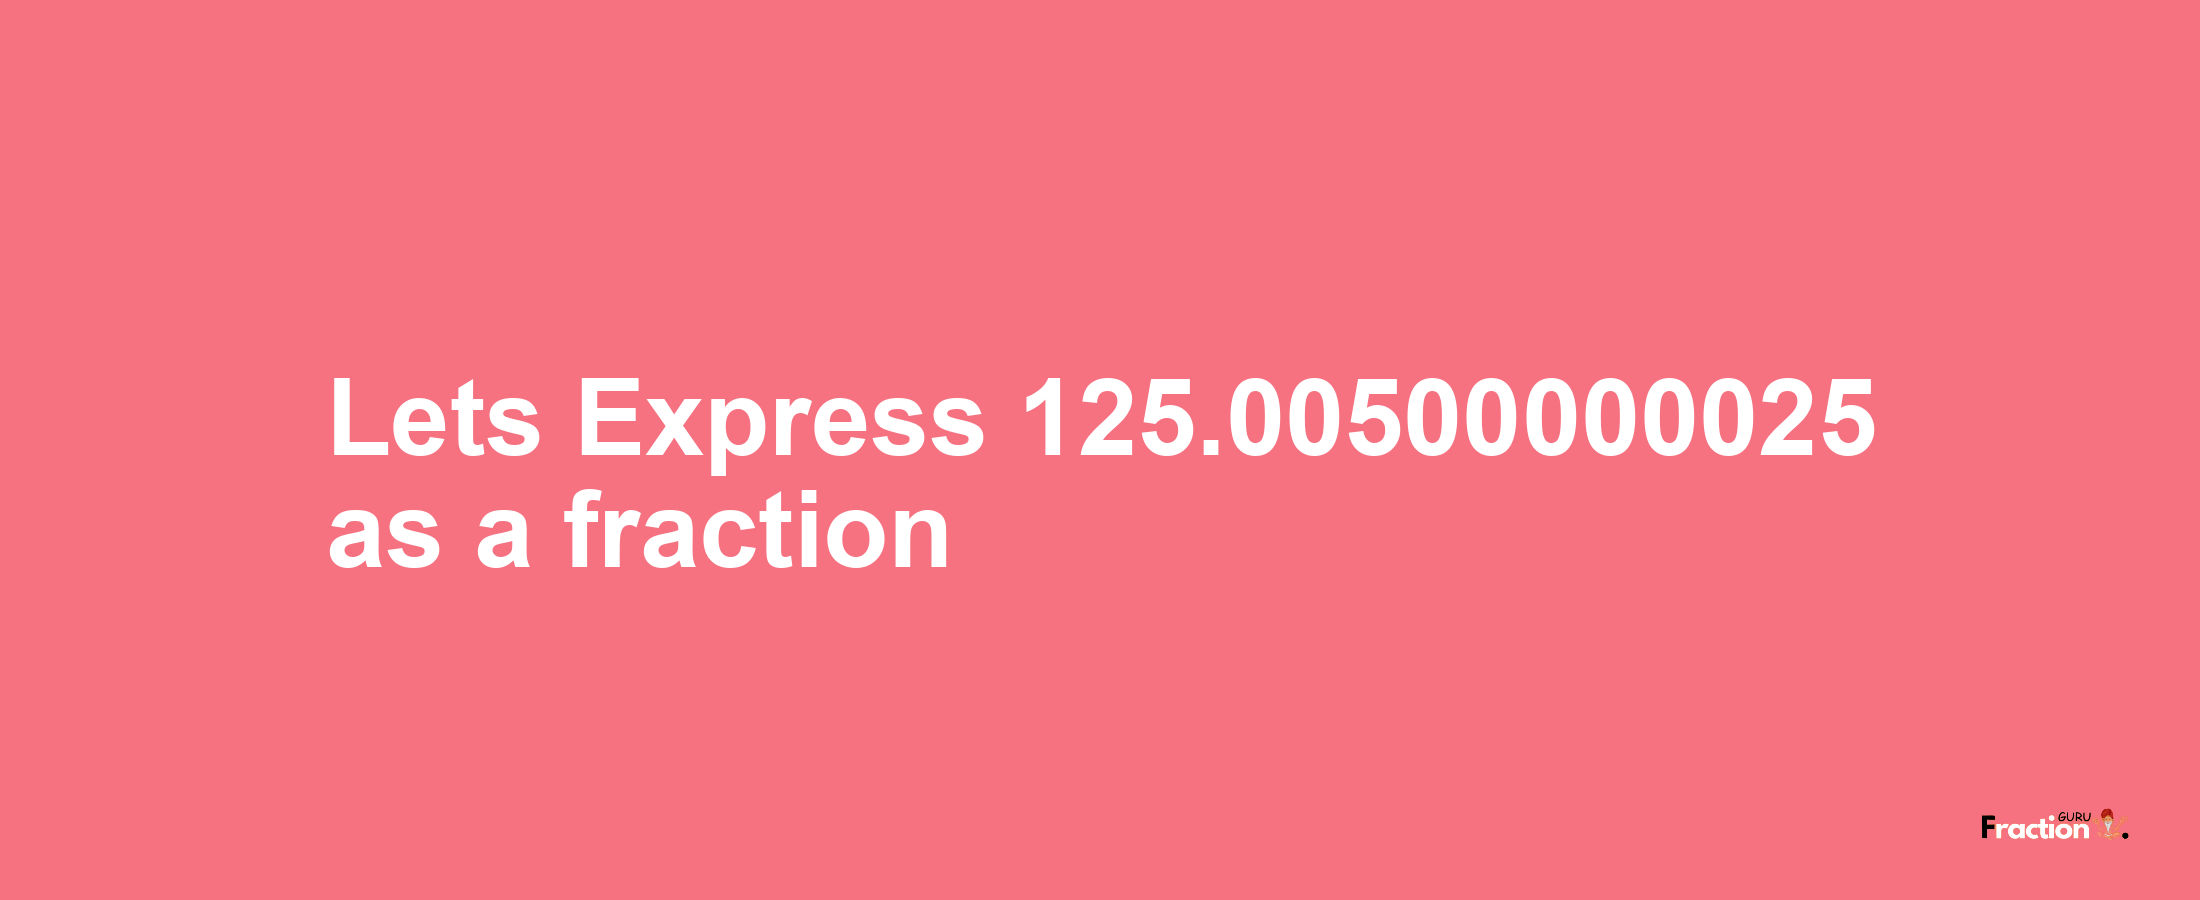 Lets Express 125.00500000025 as afraction